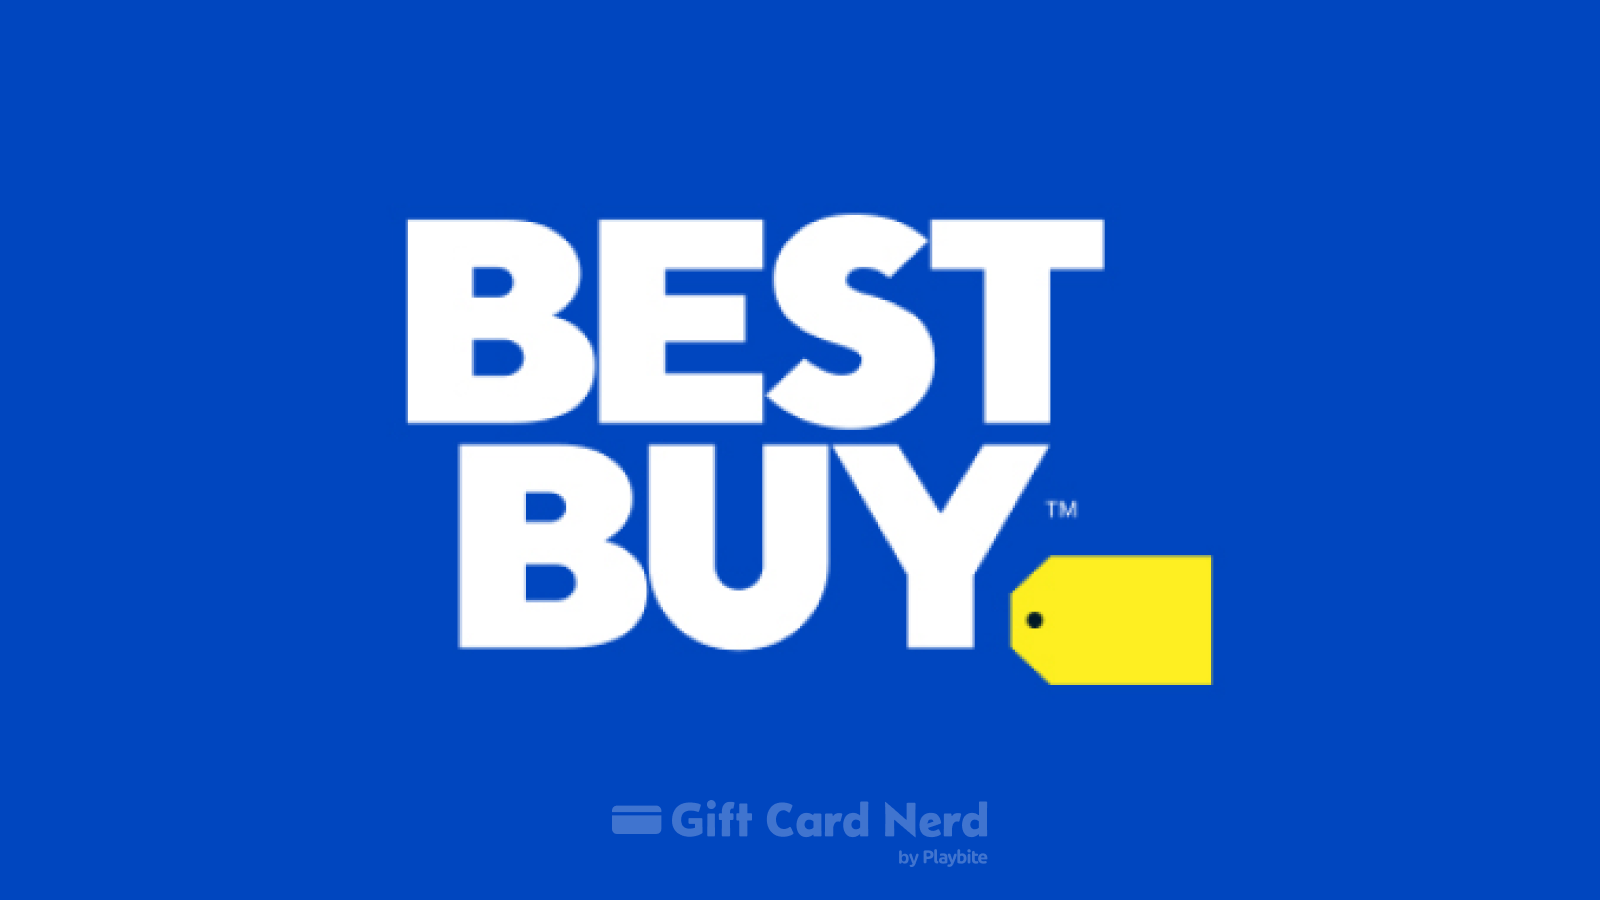 Can I Use a Best Buy Gift Card on Grubhub?